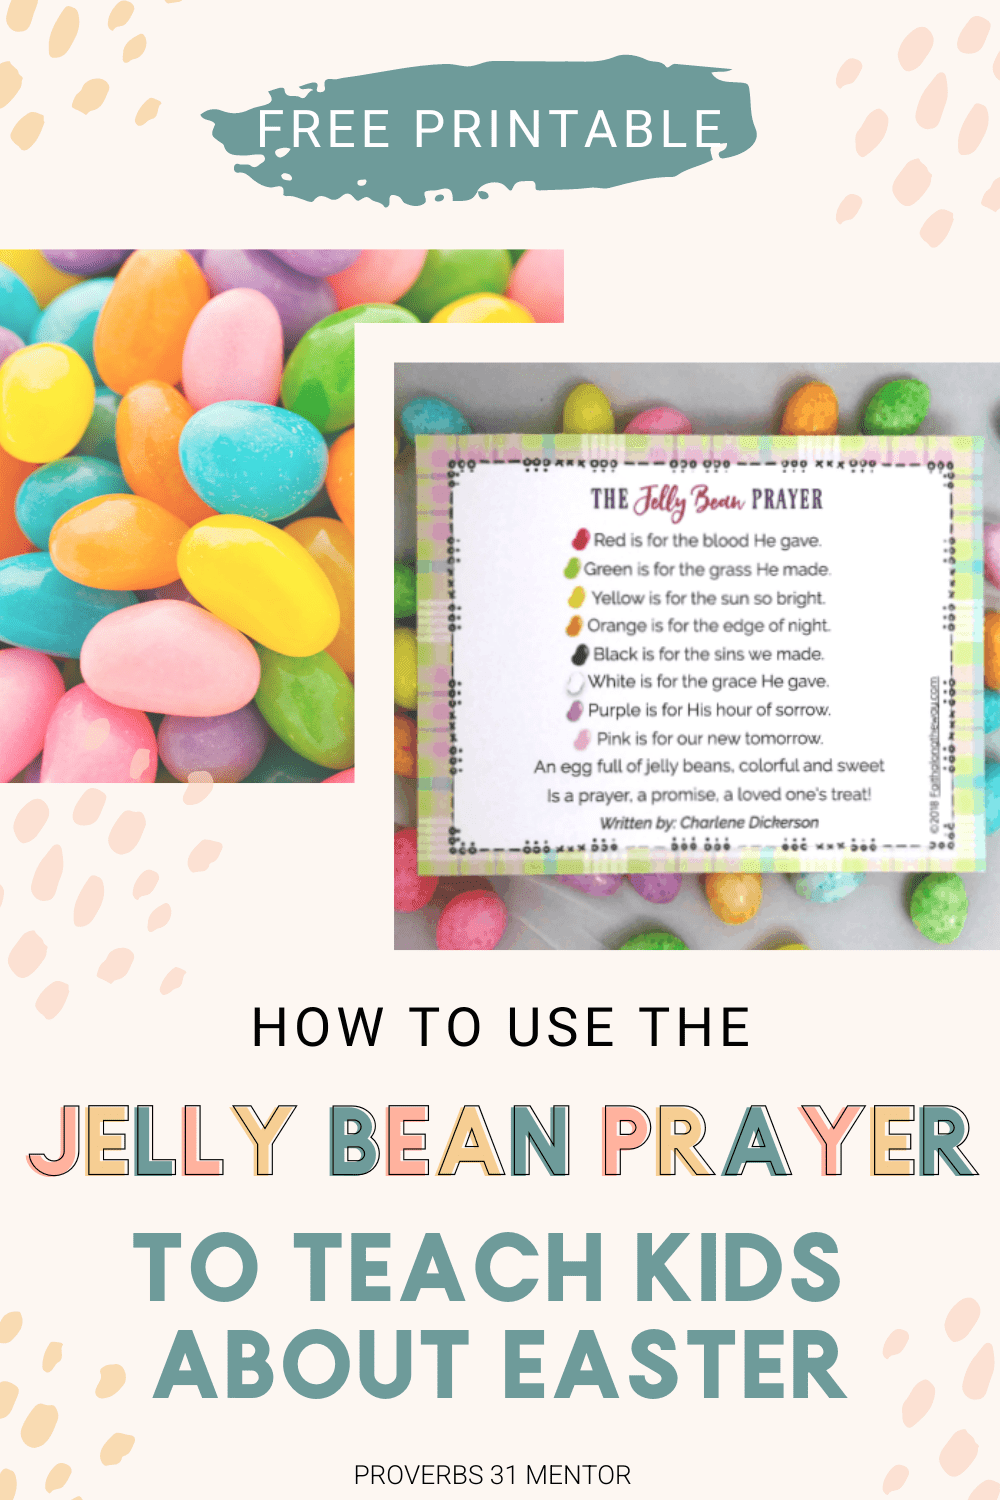 Title- How to Use the Jelly Bean Prayer to Teach Kids About Easter Picture- the jelly bean prayer and jellybeans